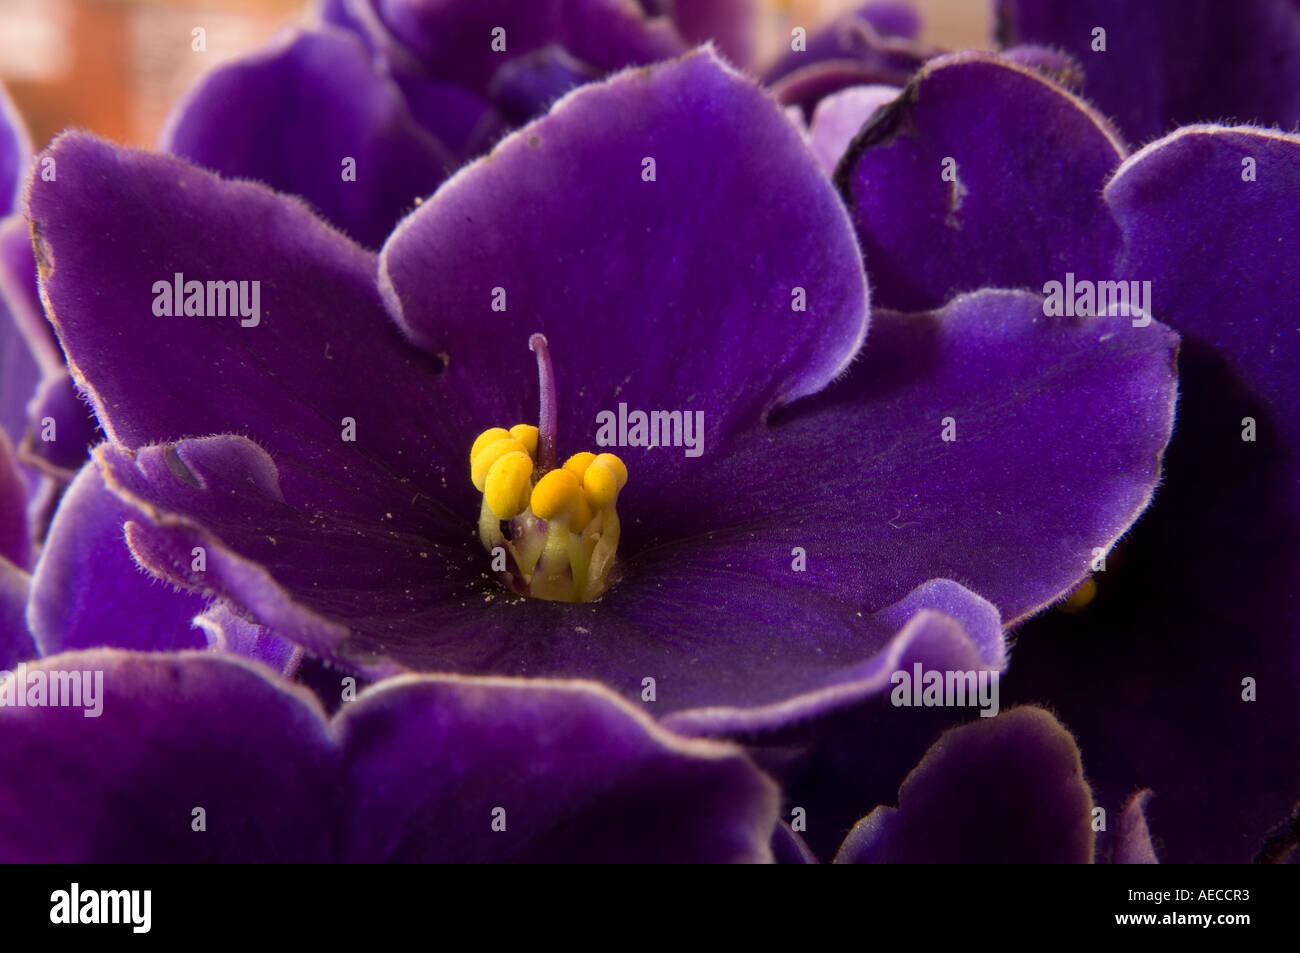 Close up of an African Violet Flower first discovered by Baron Waletr von Saint Paul in Africa in the 19th century Stock Photo